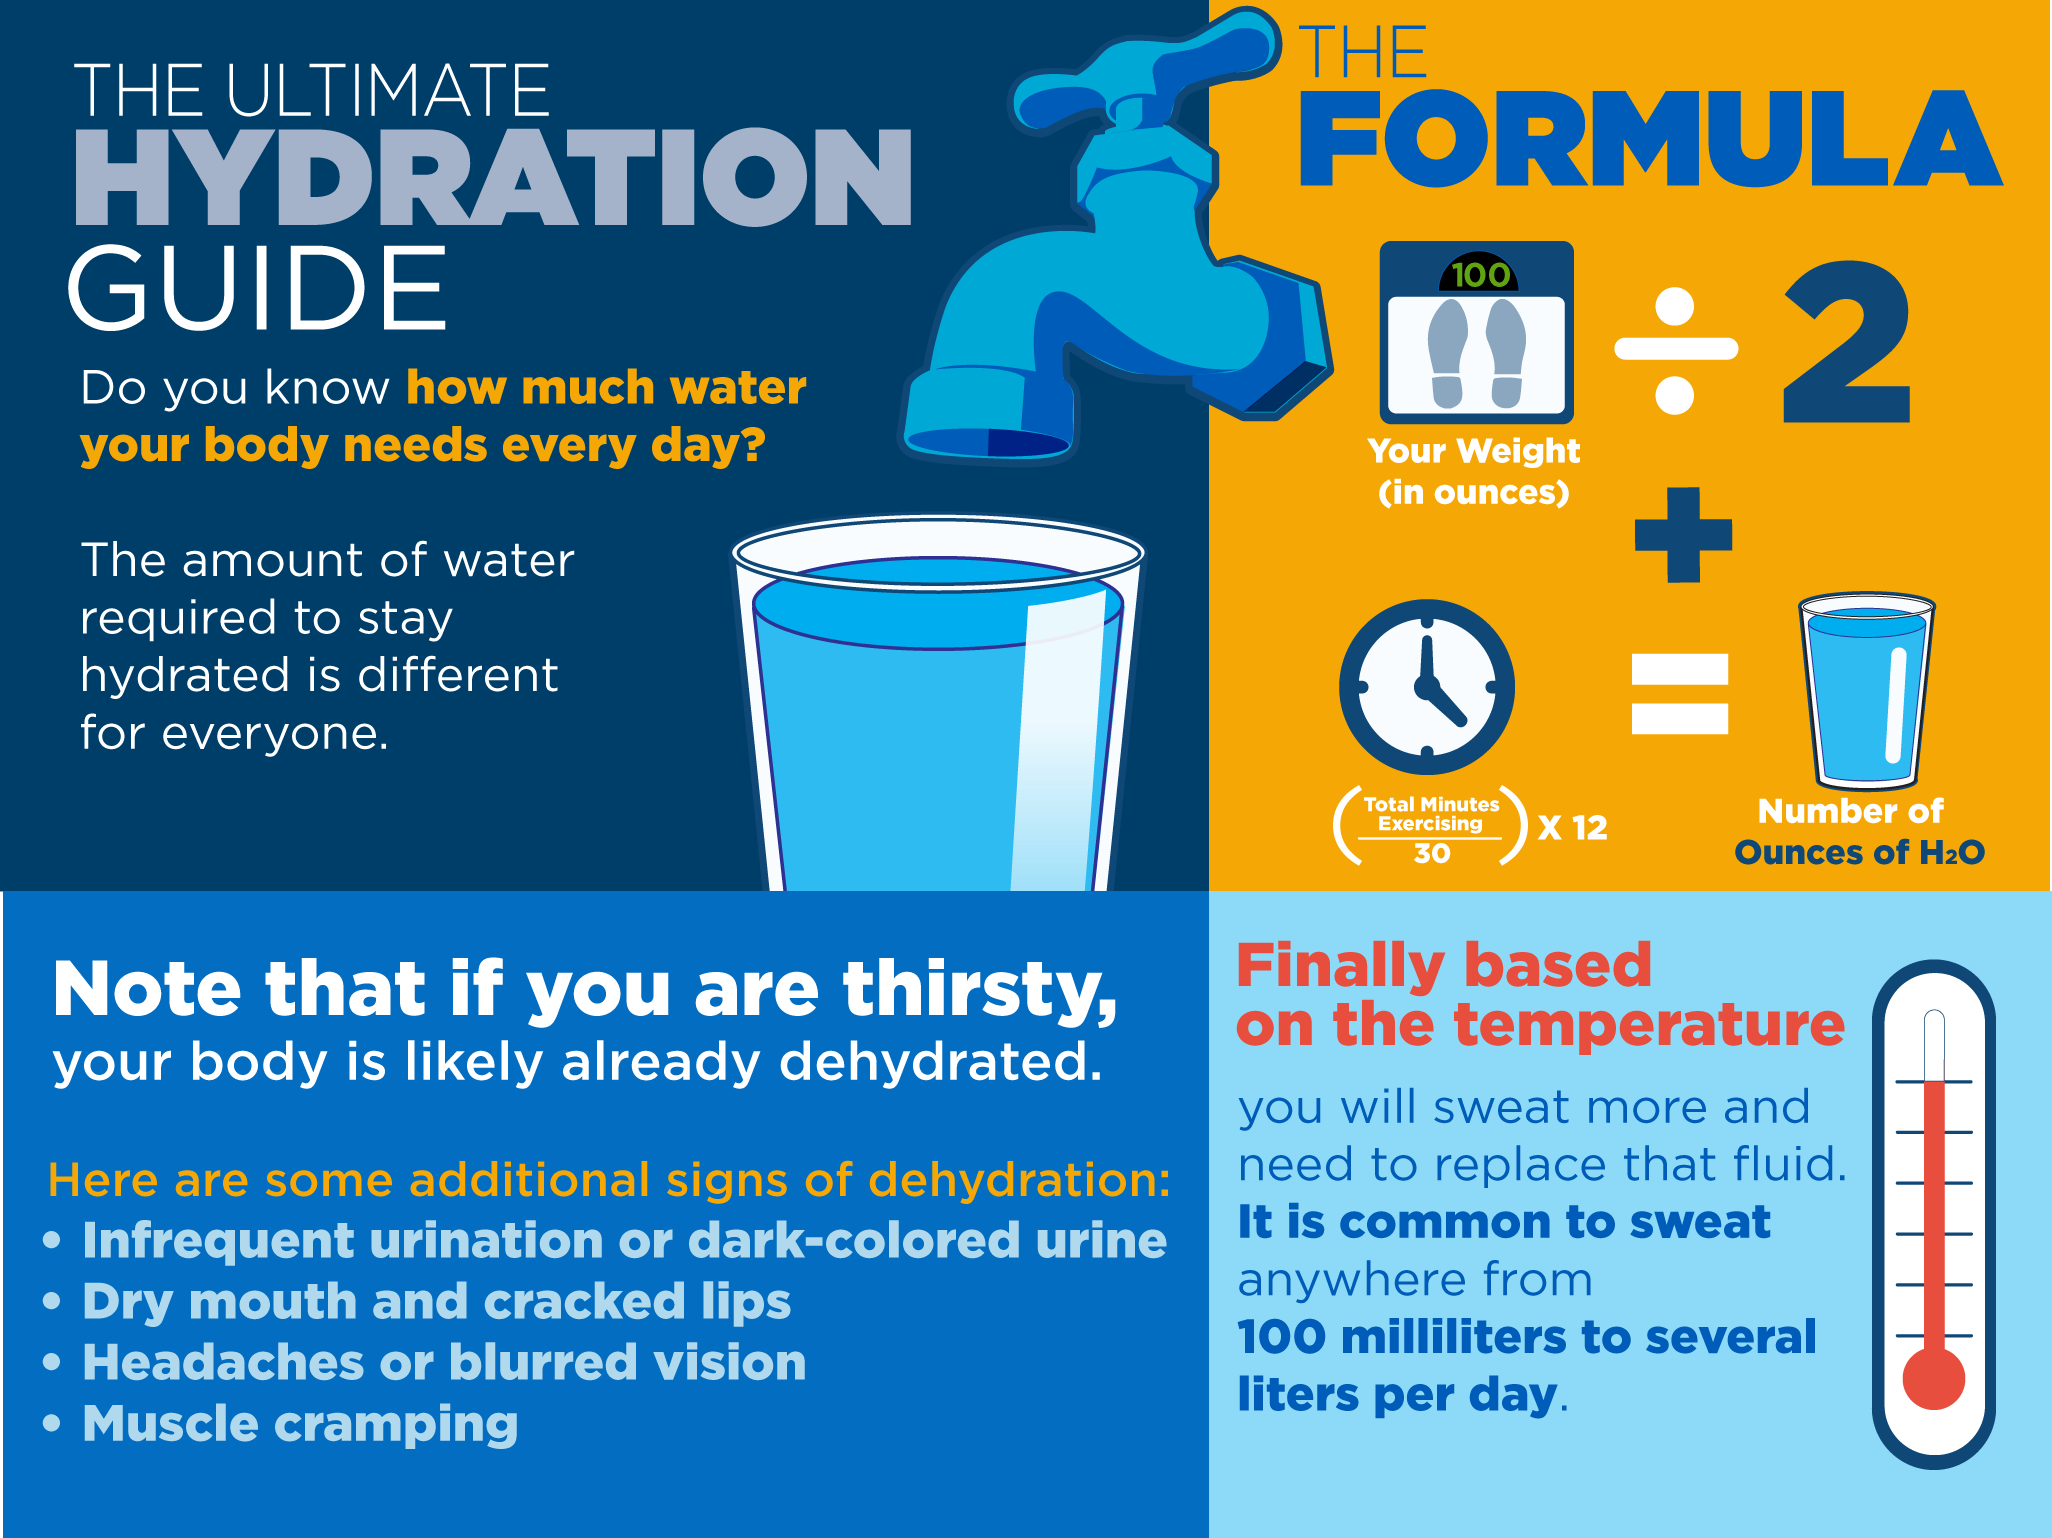 Hydration Infographic